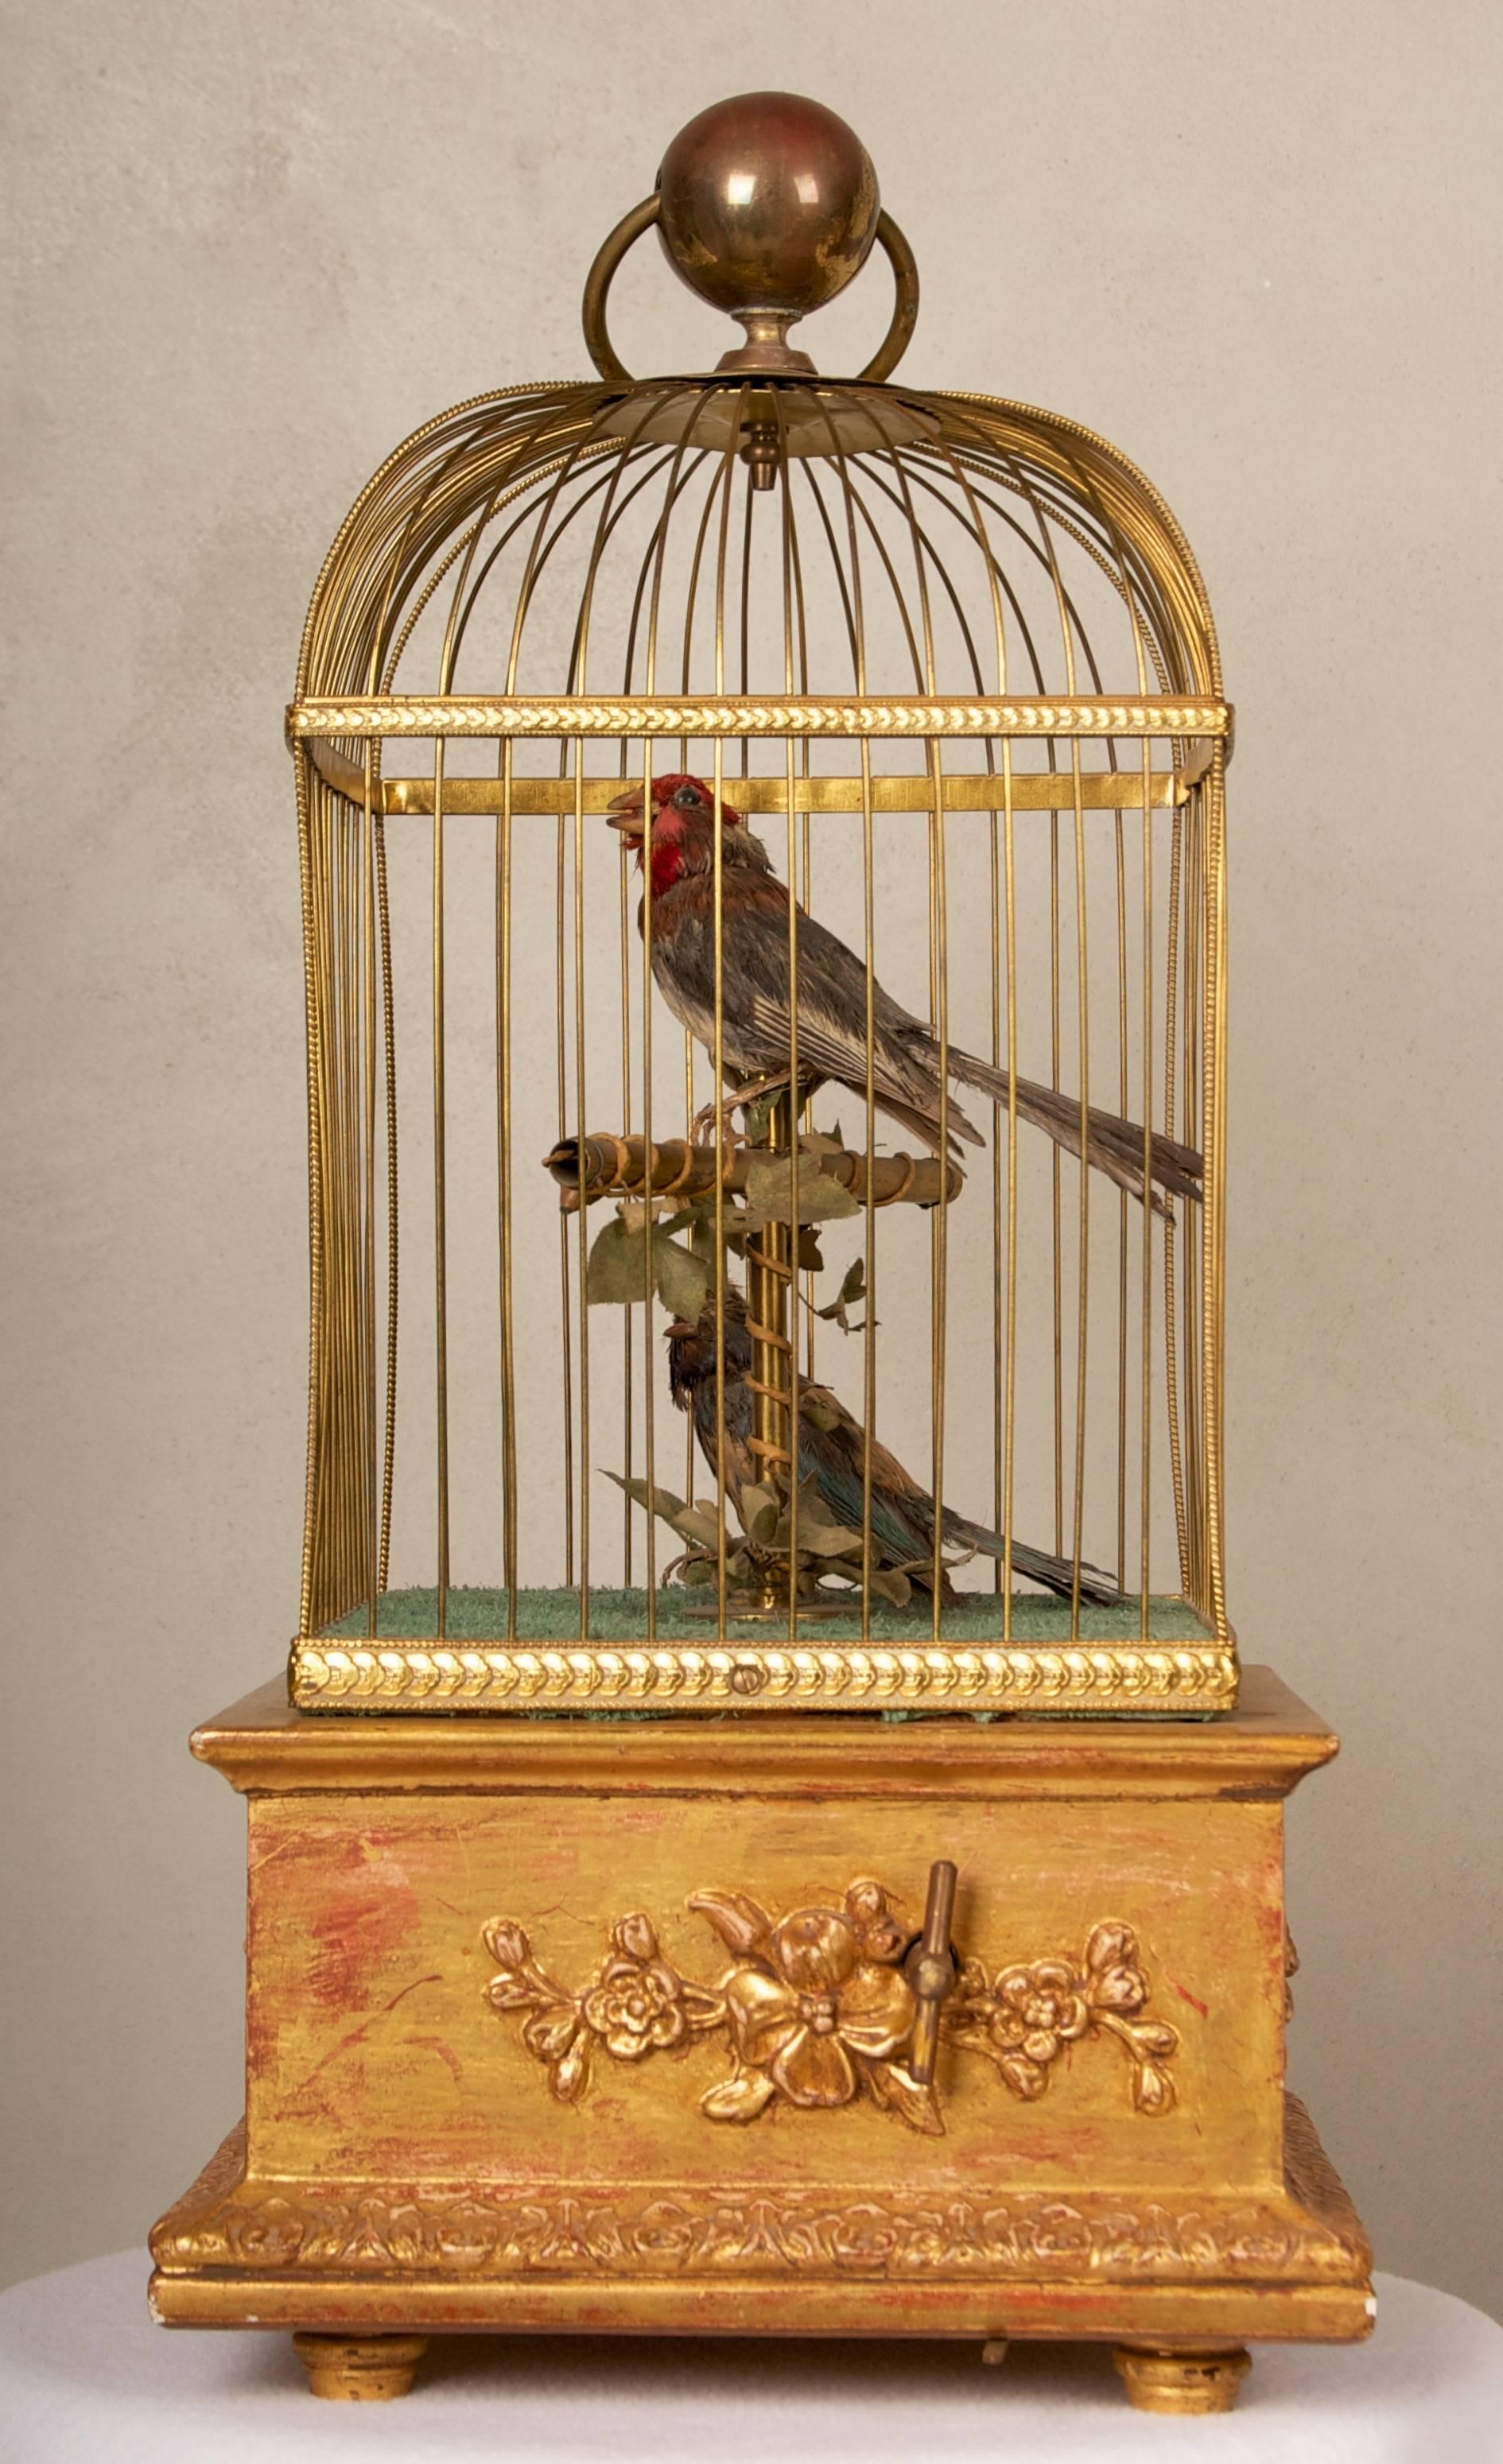 Swiss Late 19th Century French Automation Singing Birds in giltwood and brass cage